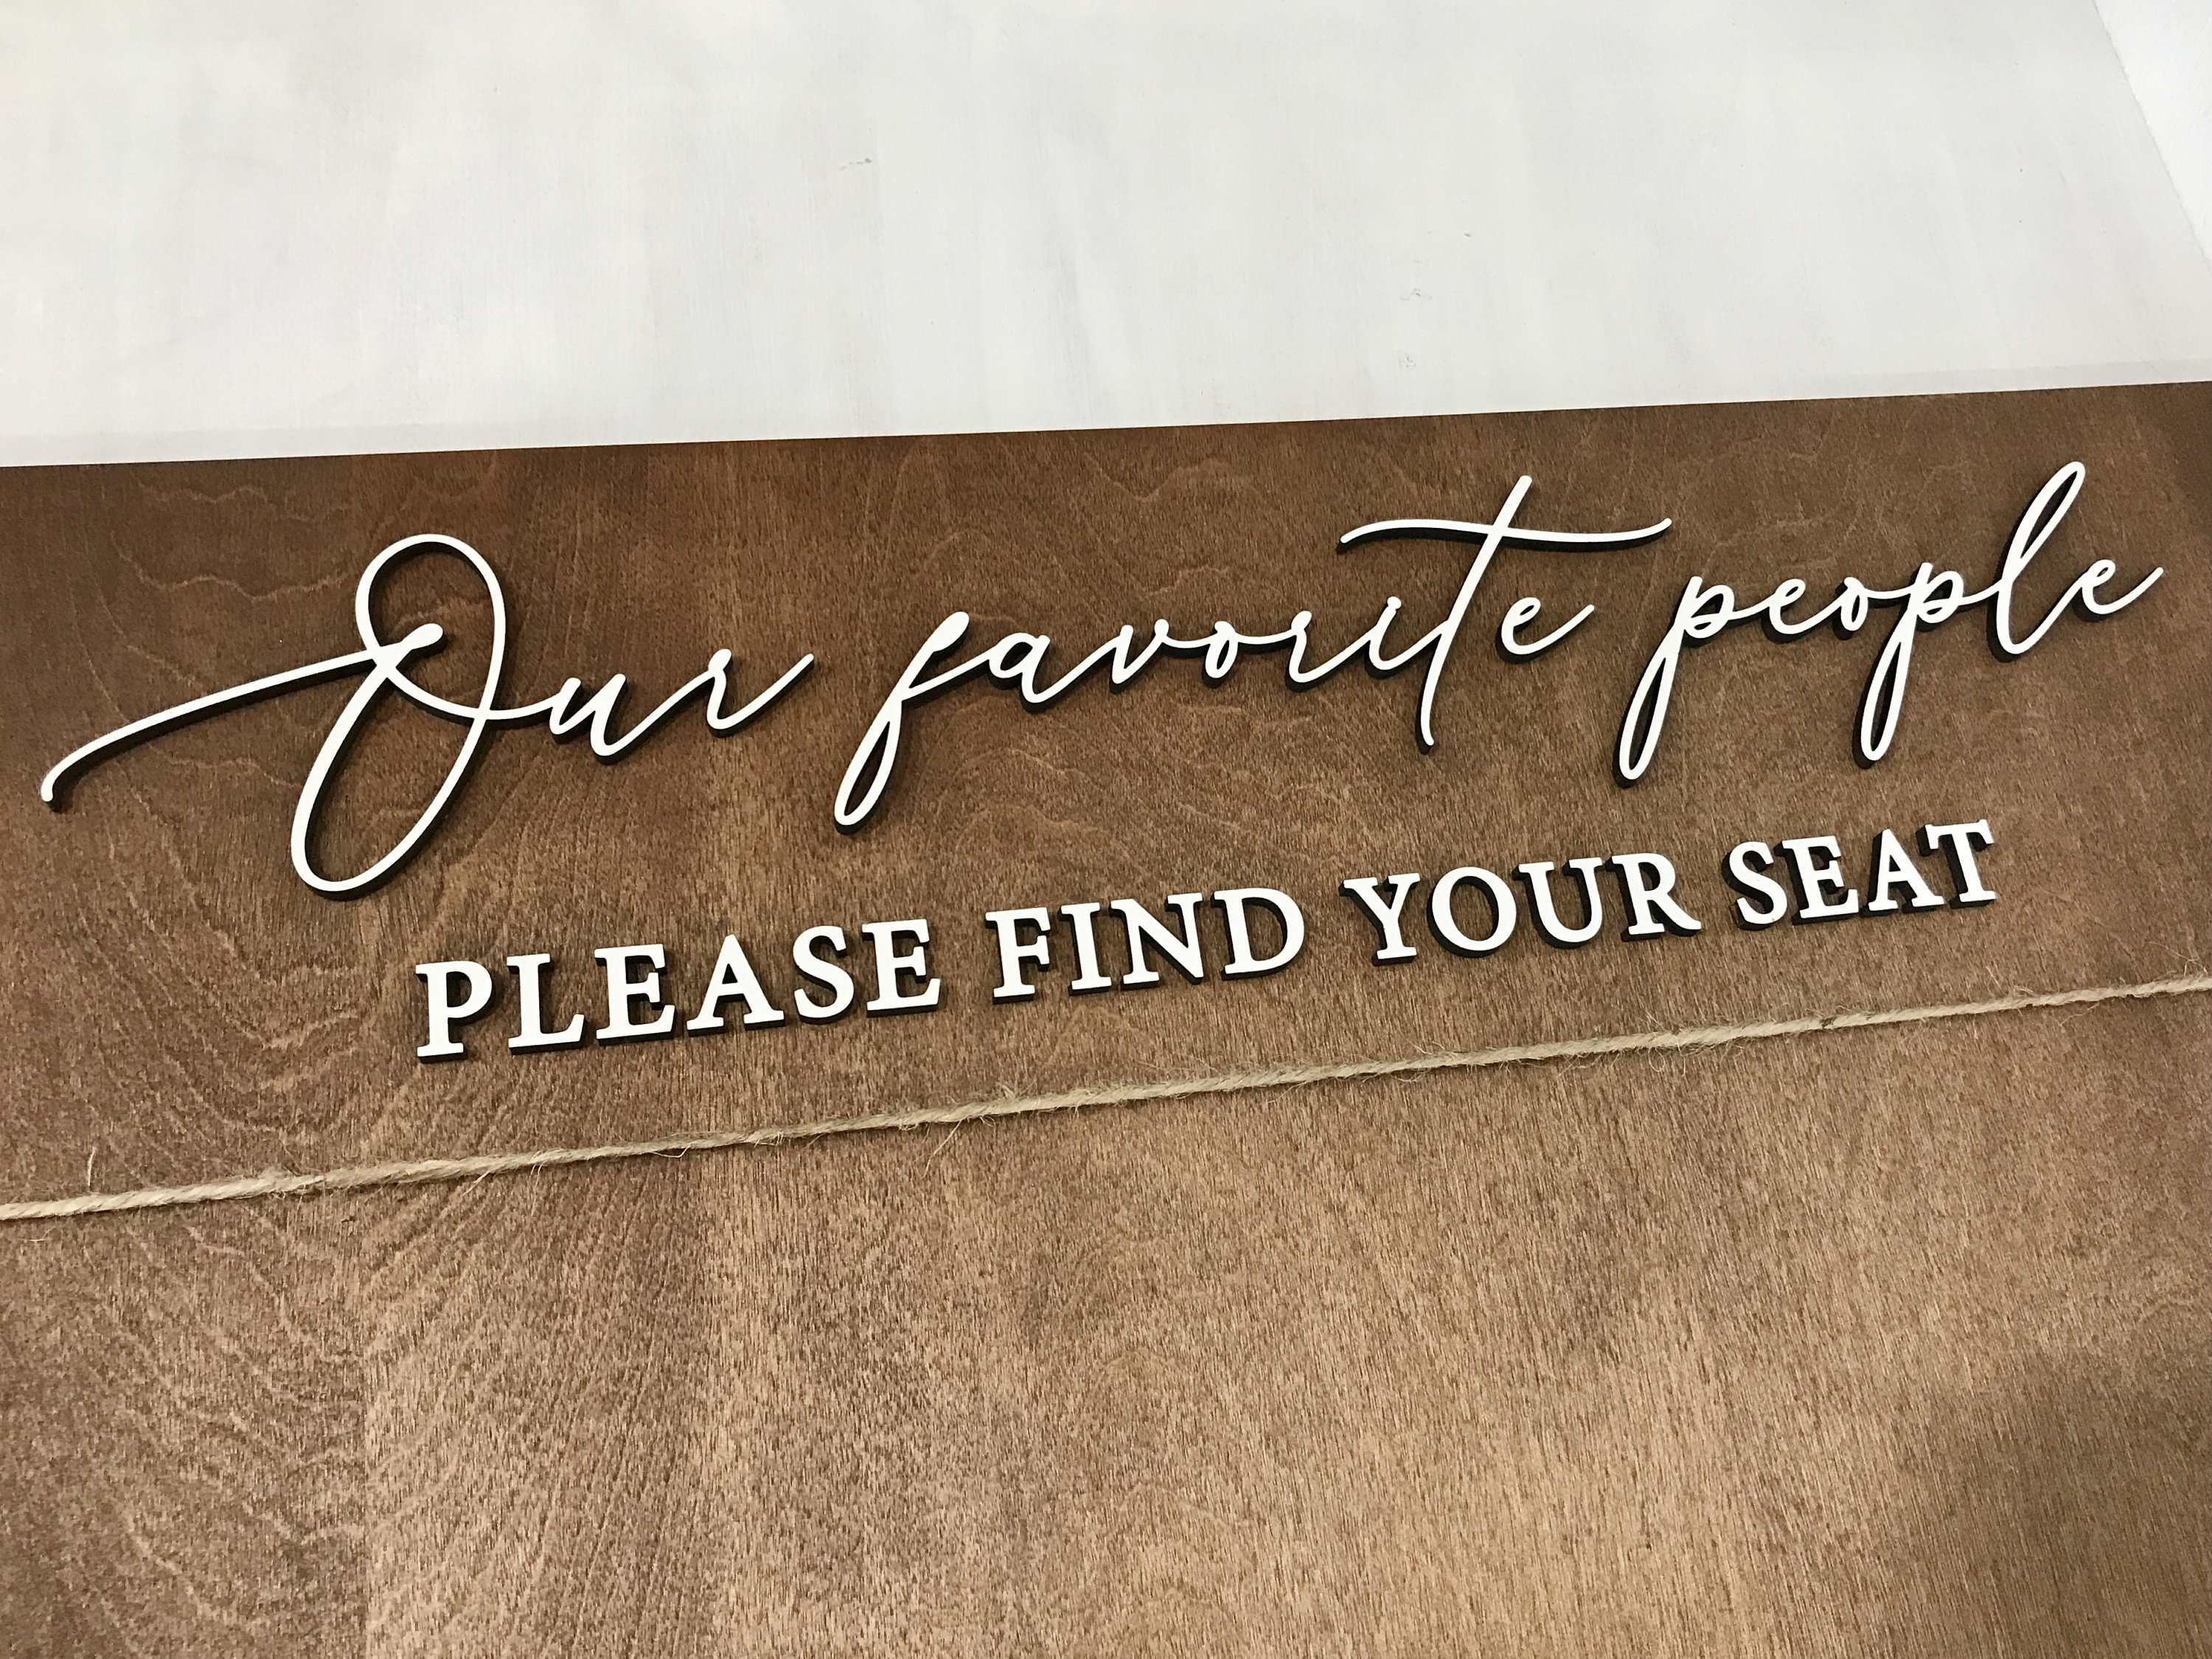 Products :: 3D wedding seating chart sign - please find your seat but your  place is on the dance floor